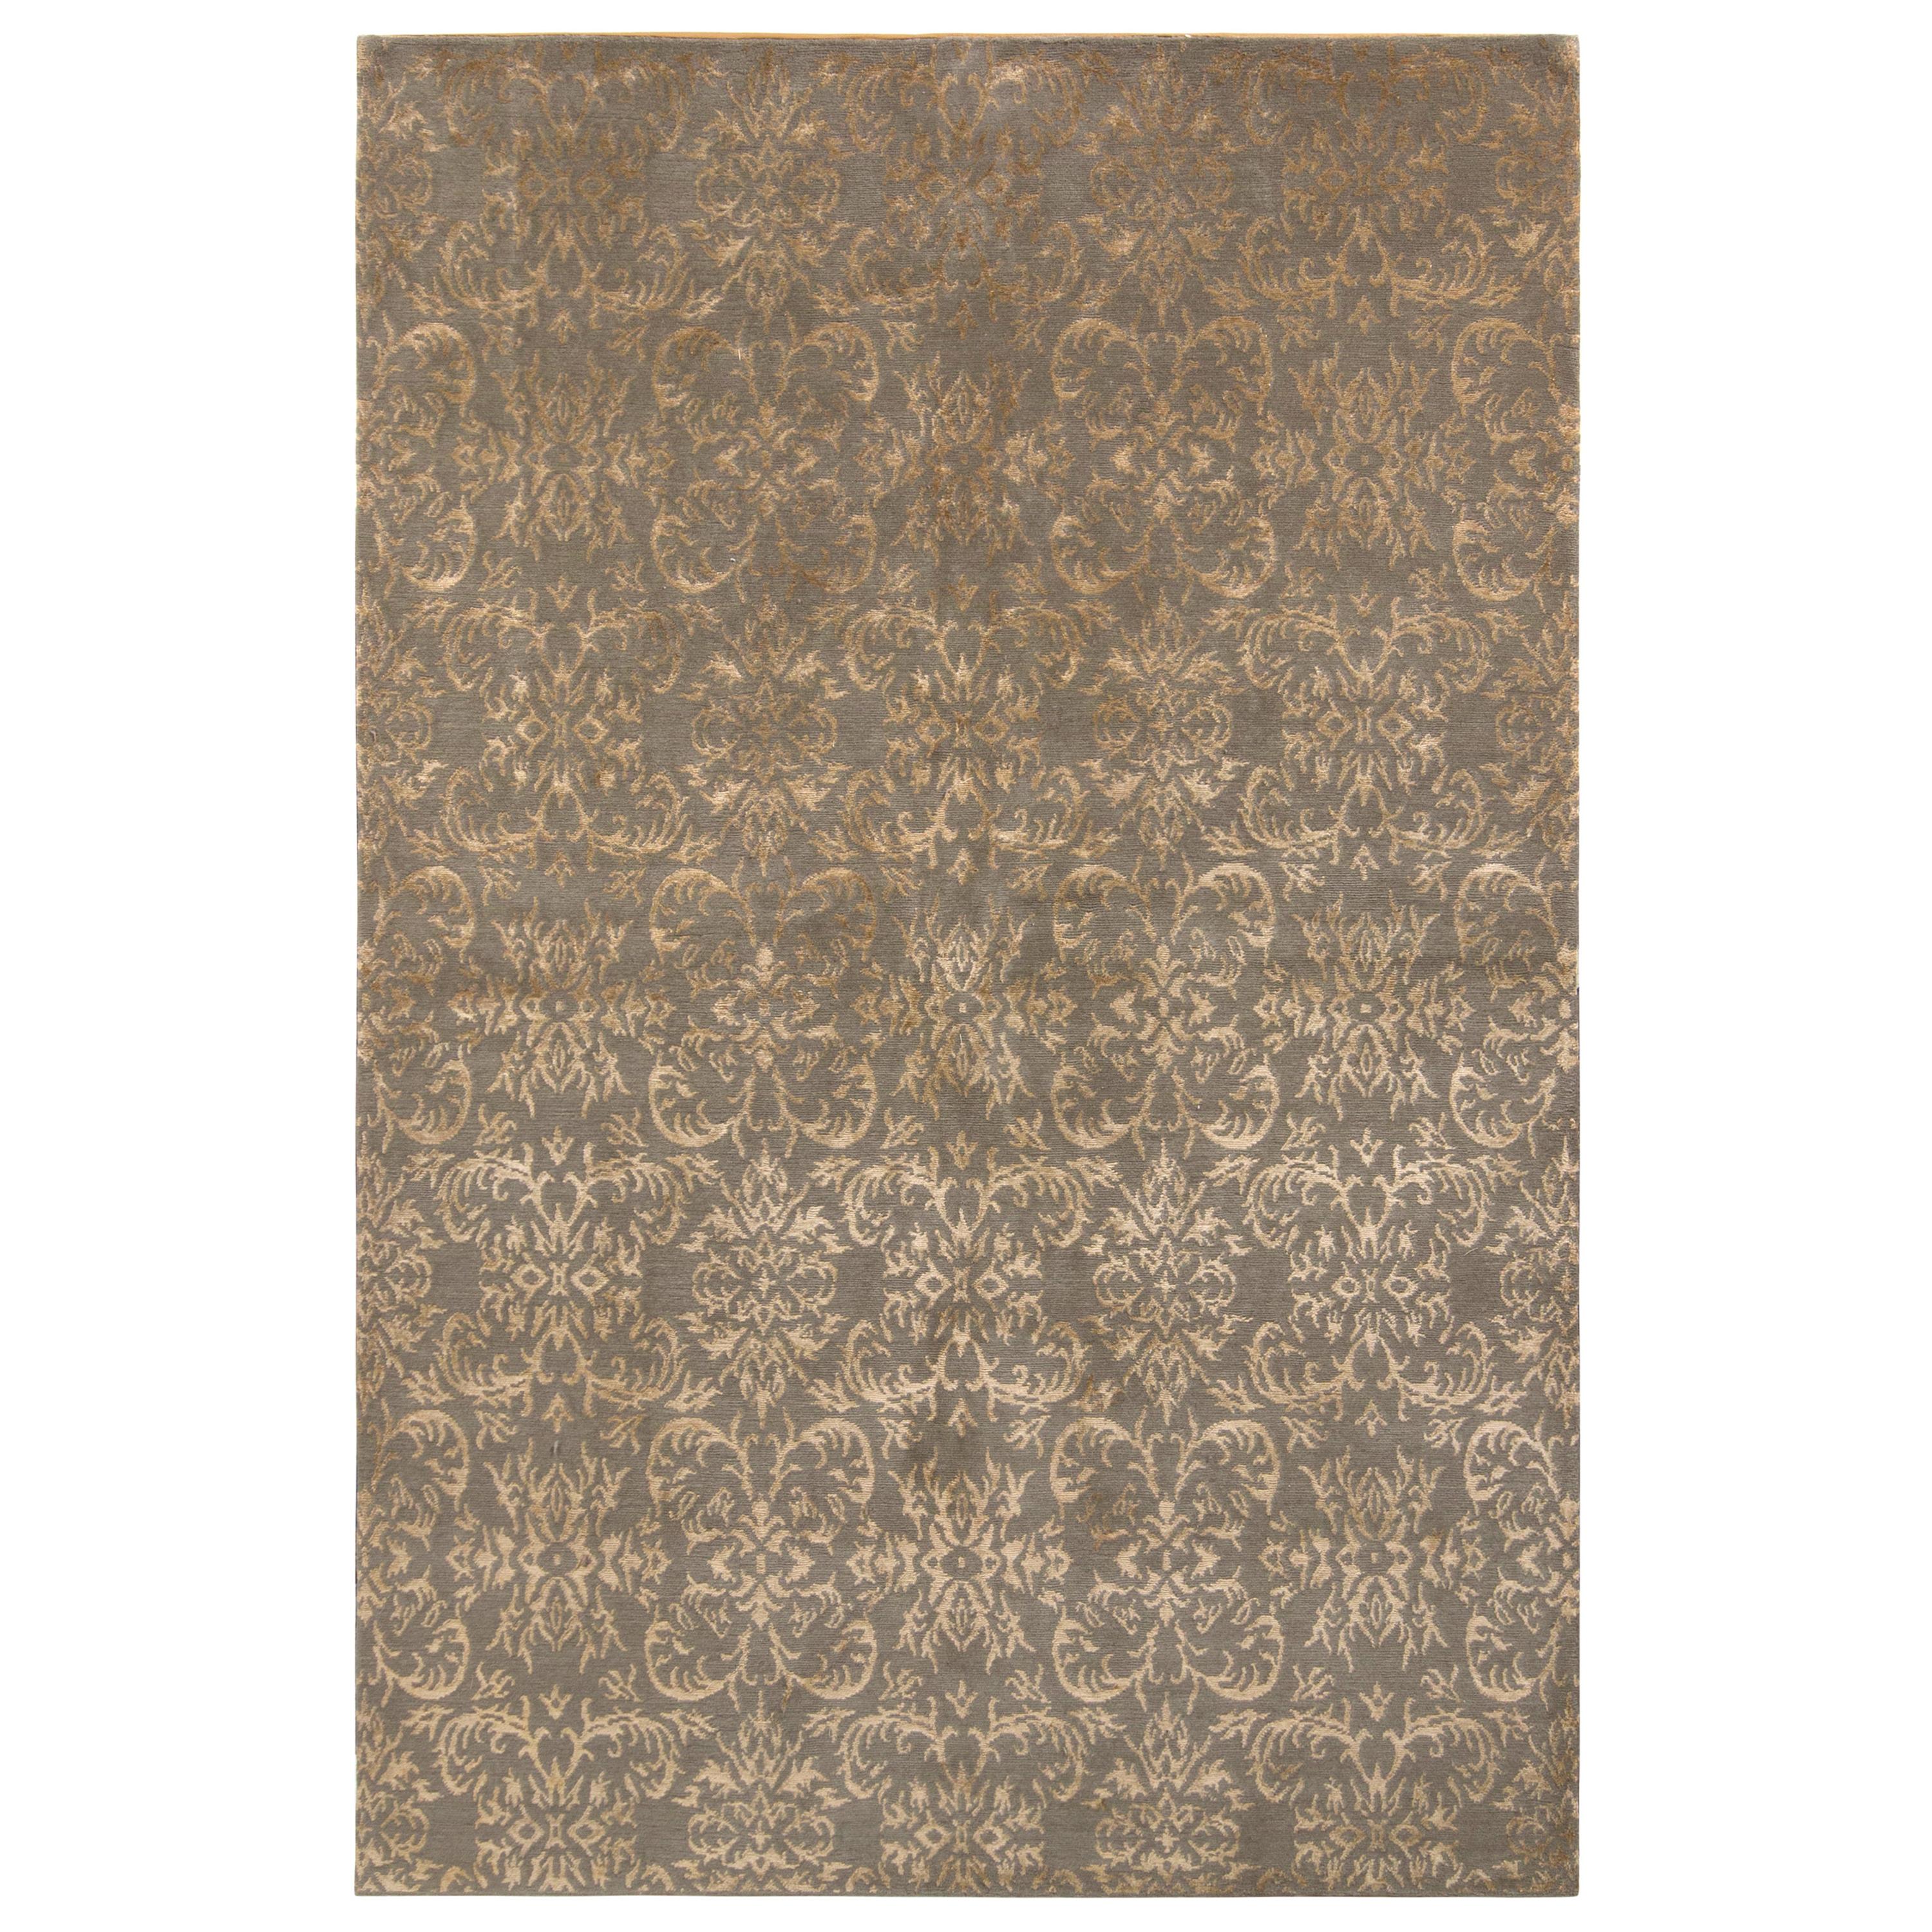 Rug & Kilim’s European Style Rug in Beige-Gold and Green Arabesque Pattern